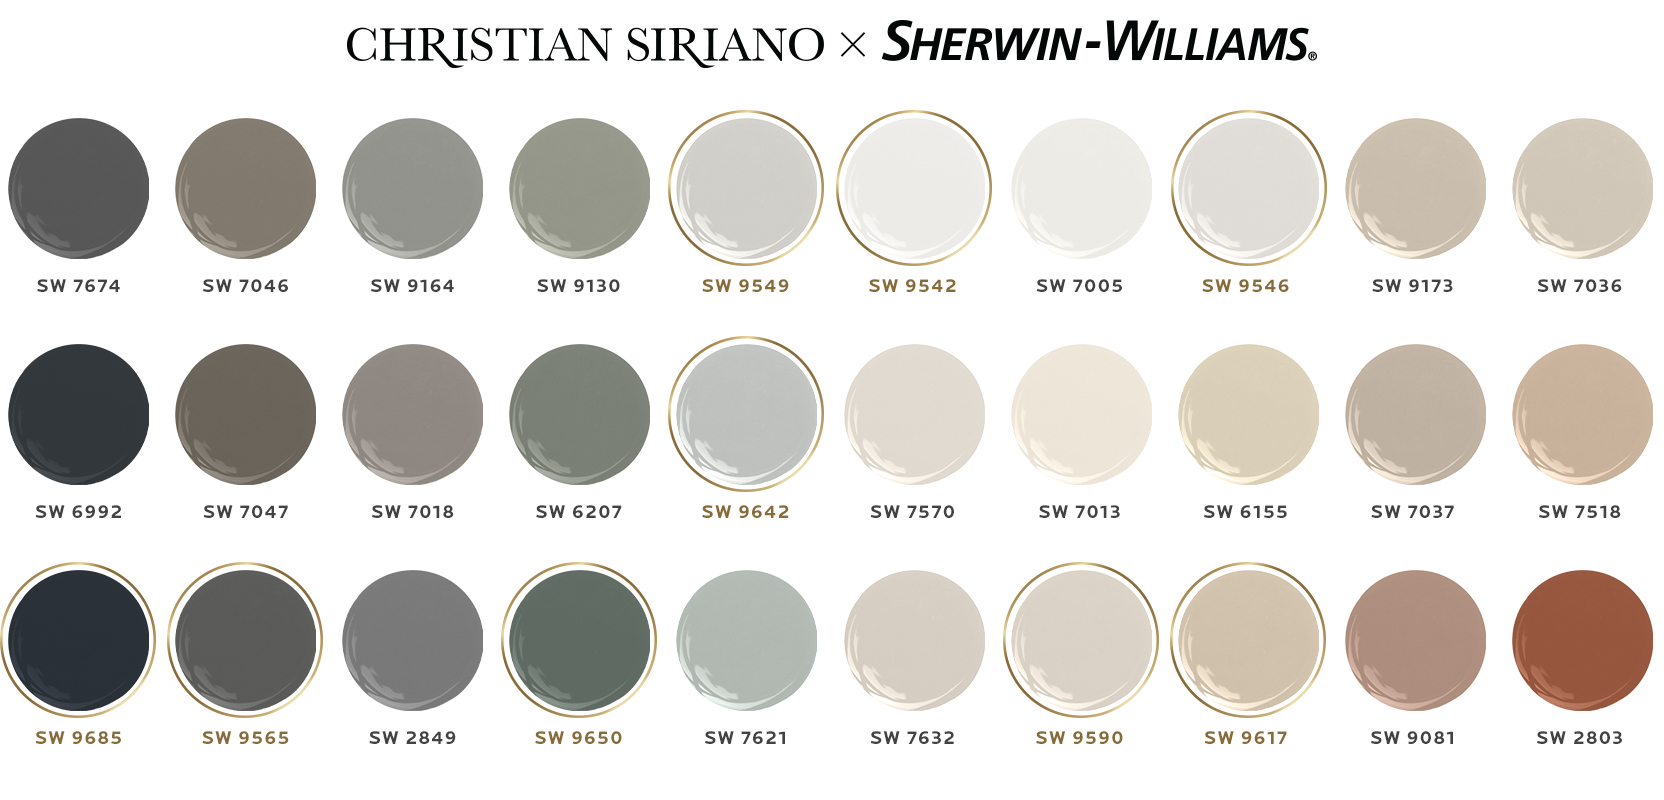 Illustration of 30 paint dollops, each a color from the Christian Siriano x Sherwin-Williams Color Collection.